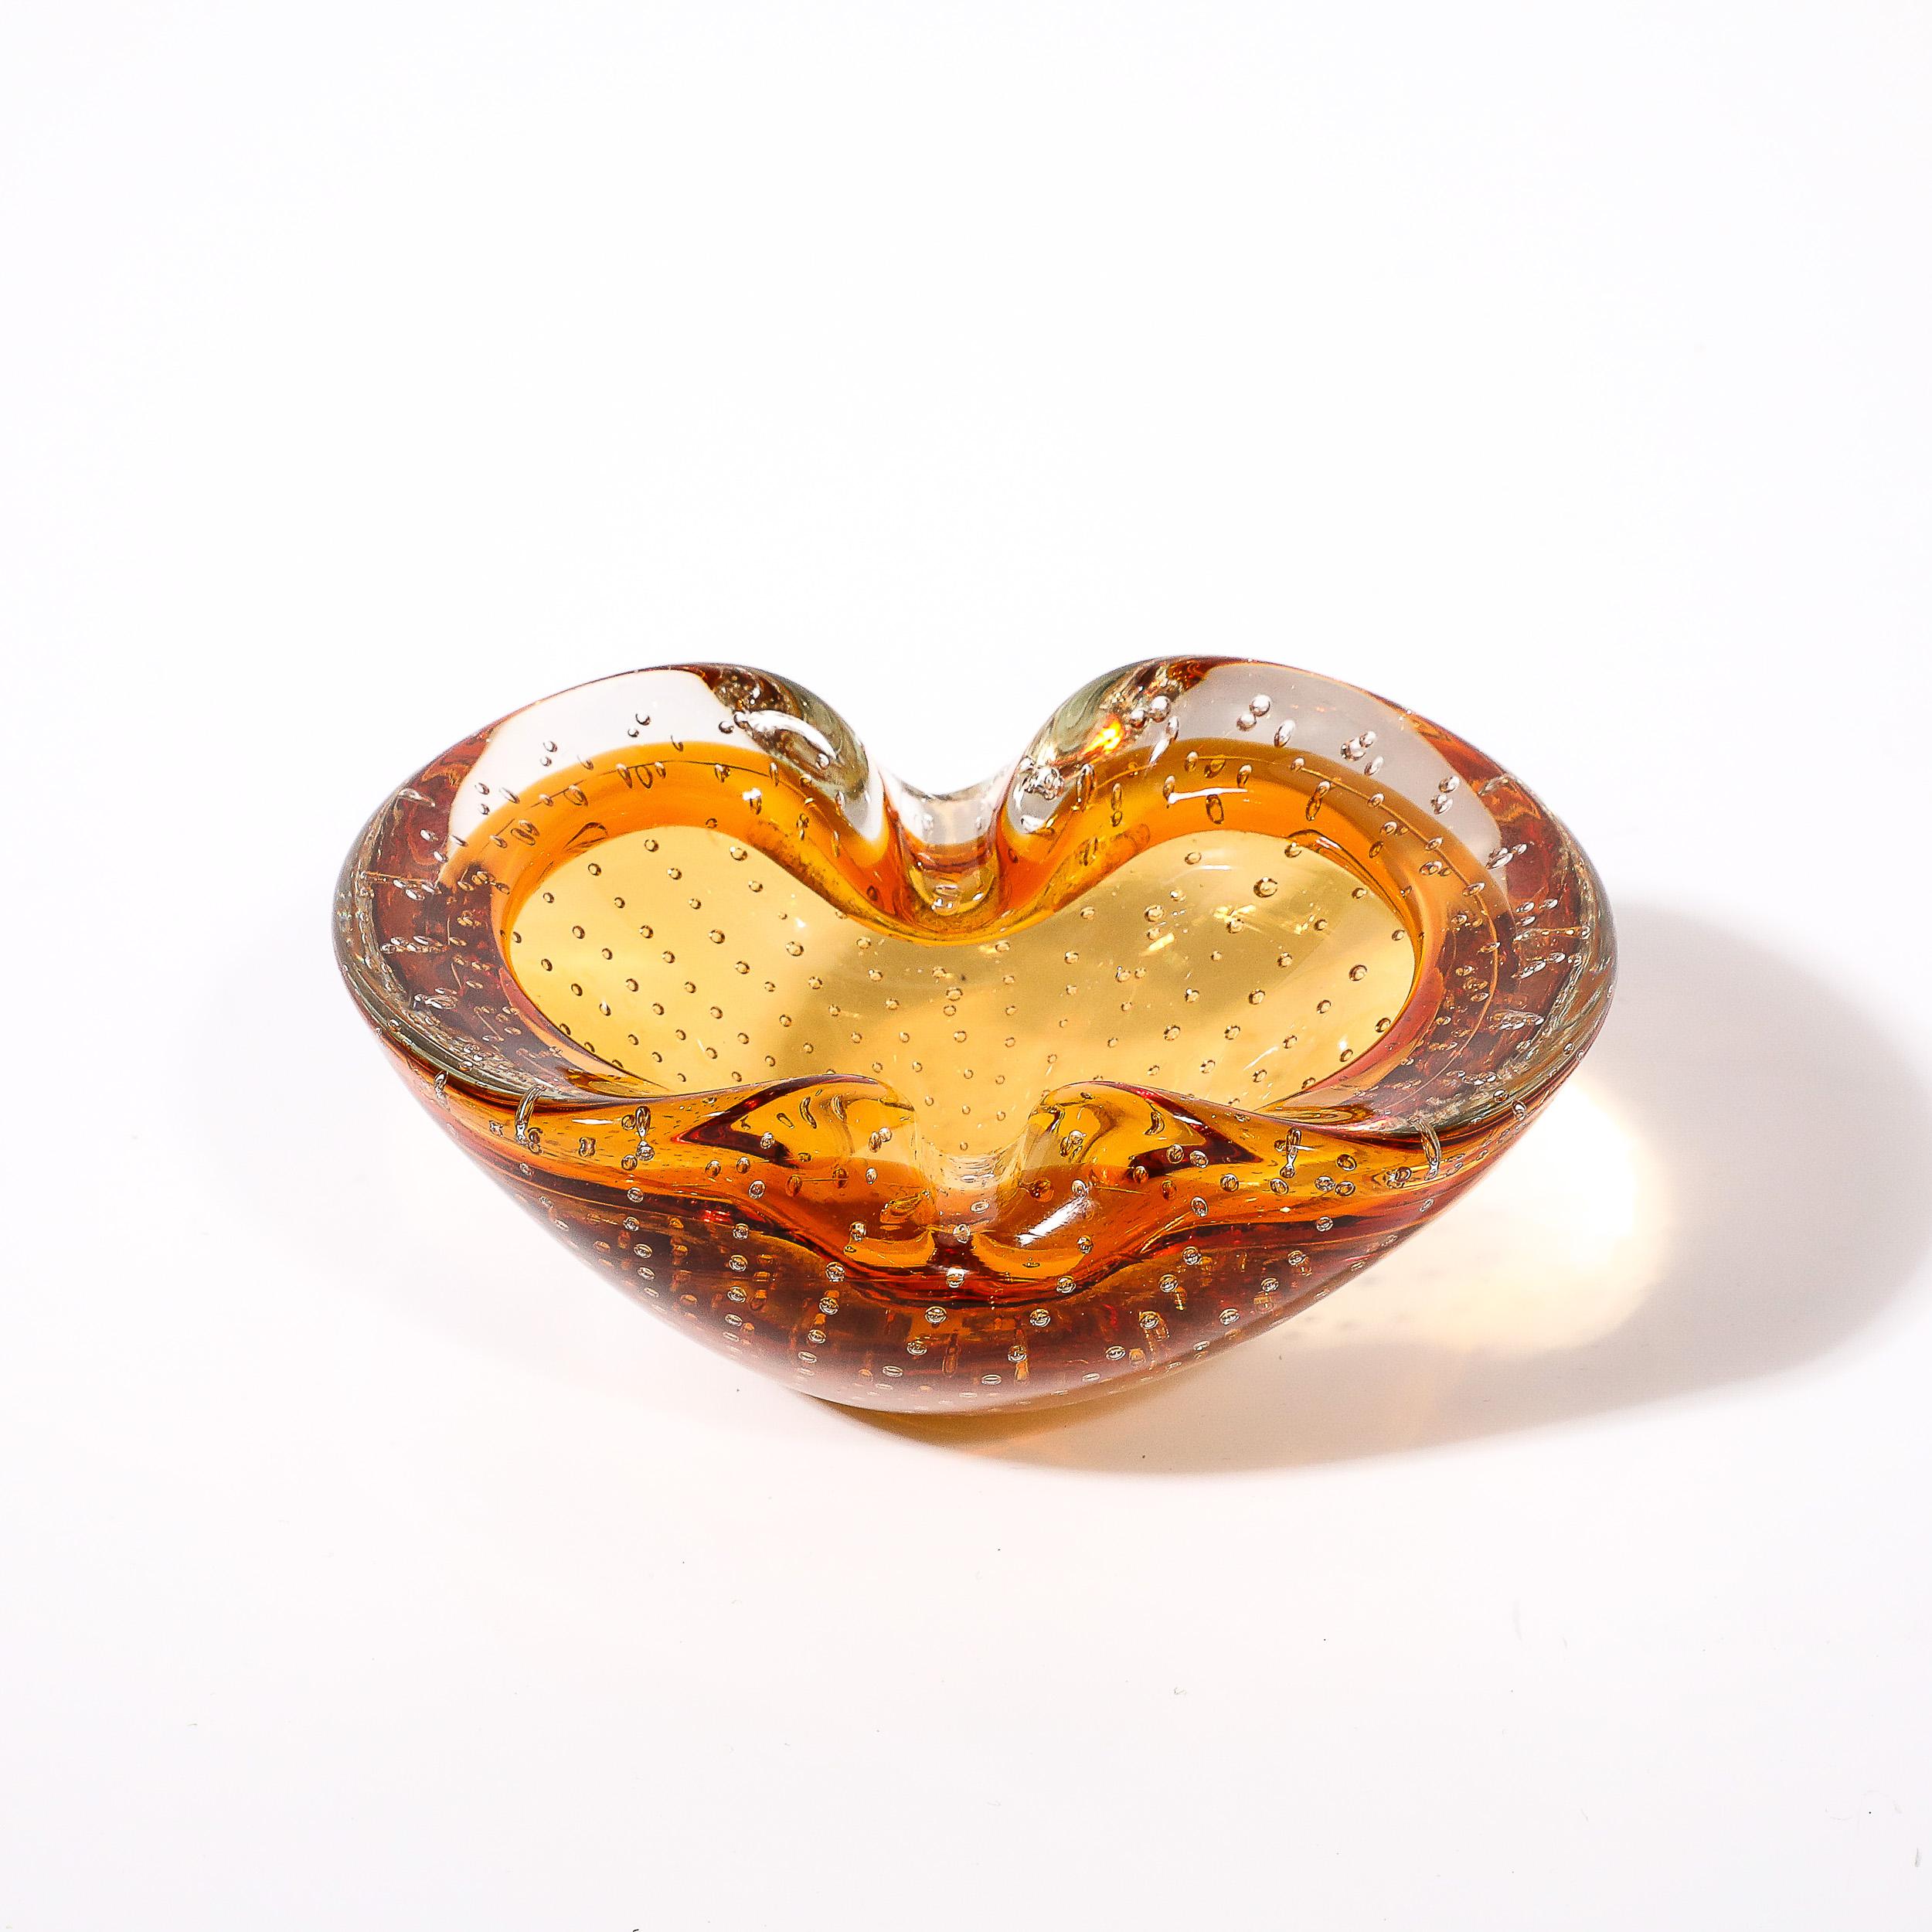 This elegant and sculptural Mid-Century Modernist Hand-Blown Murano Glass Dish with Bullicante Detailing in Amber originates from Italy, Circa 1950. Features an hourglass silhouette when viewed from above achieved by two subtle lips drawn towards